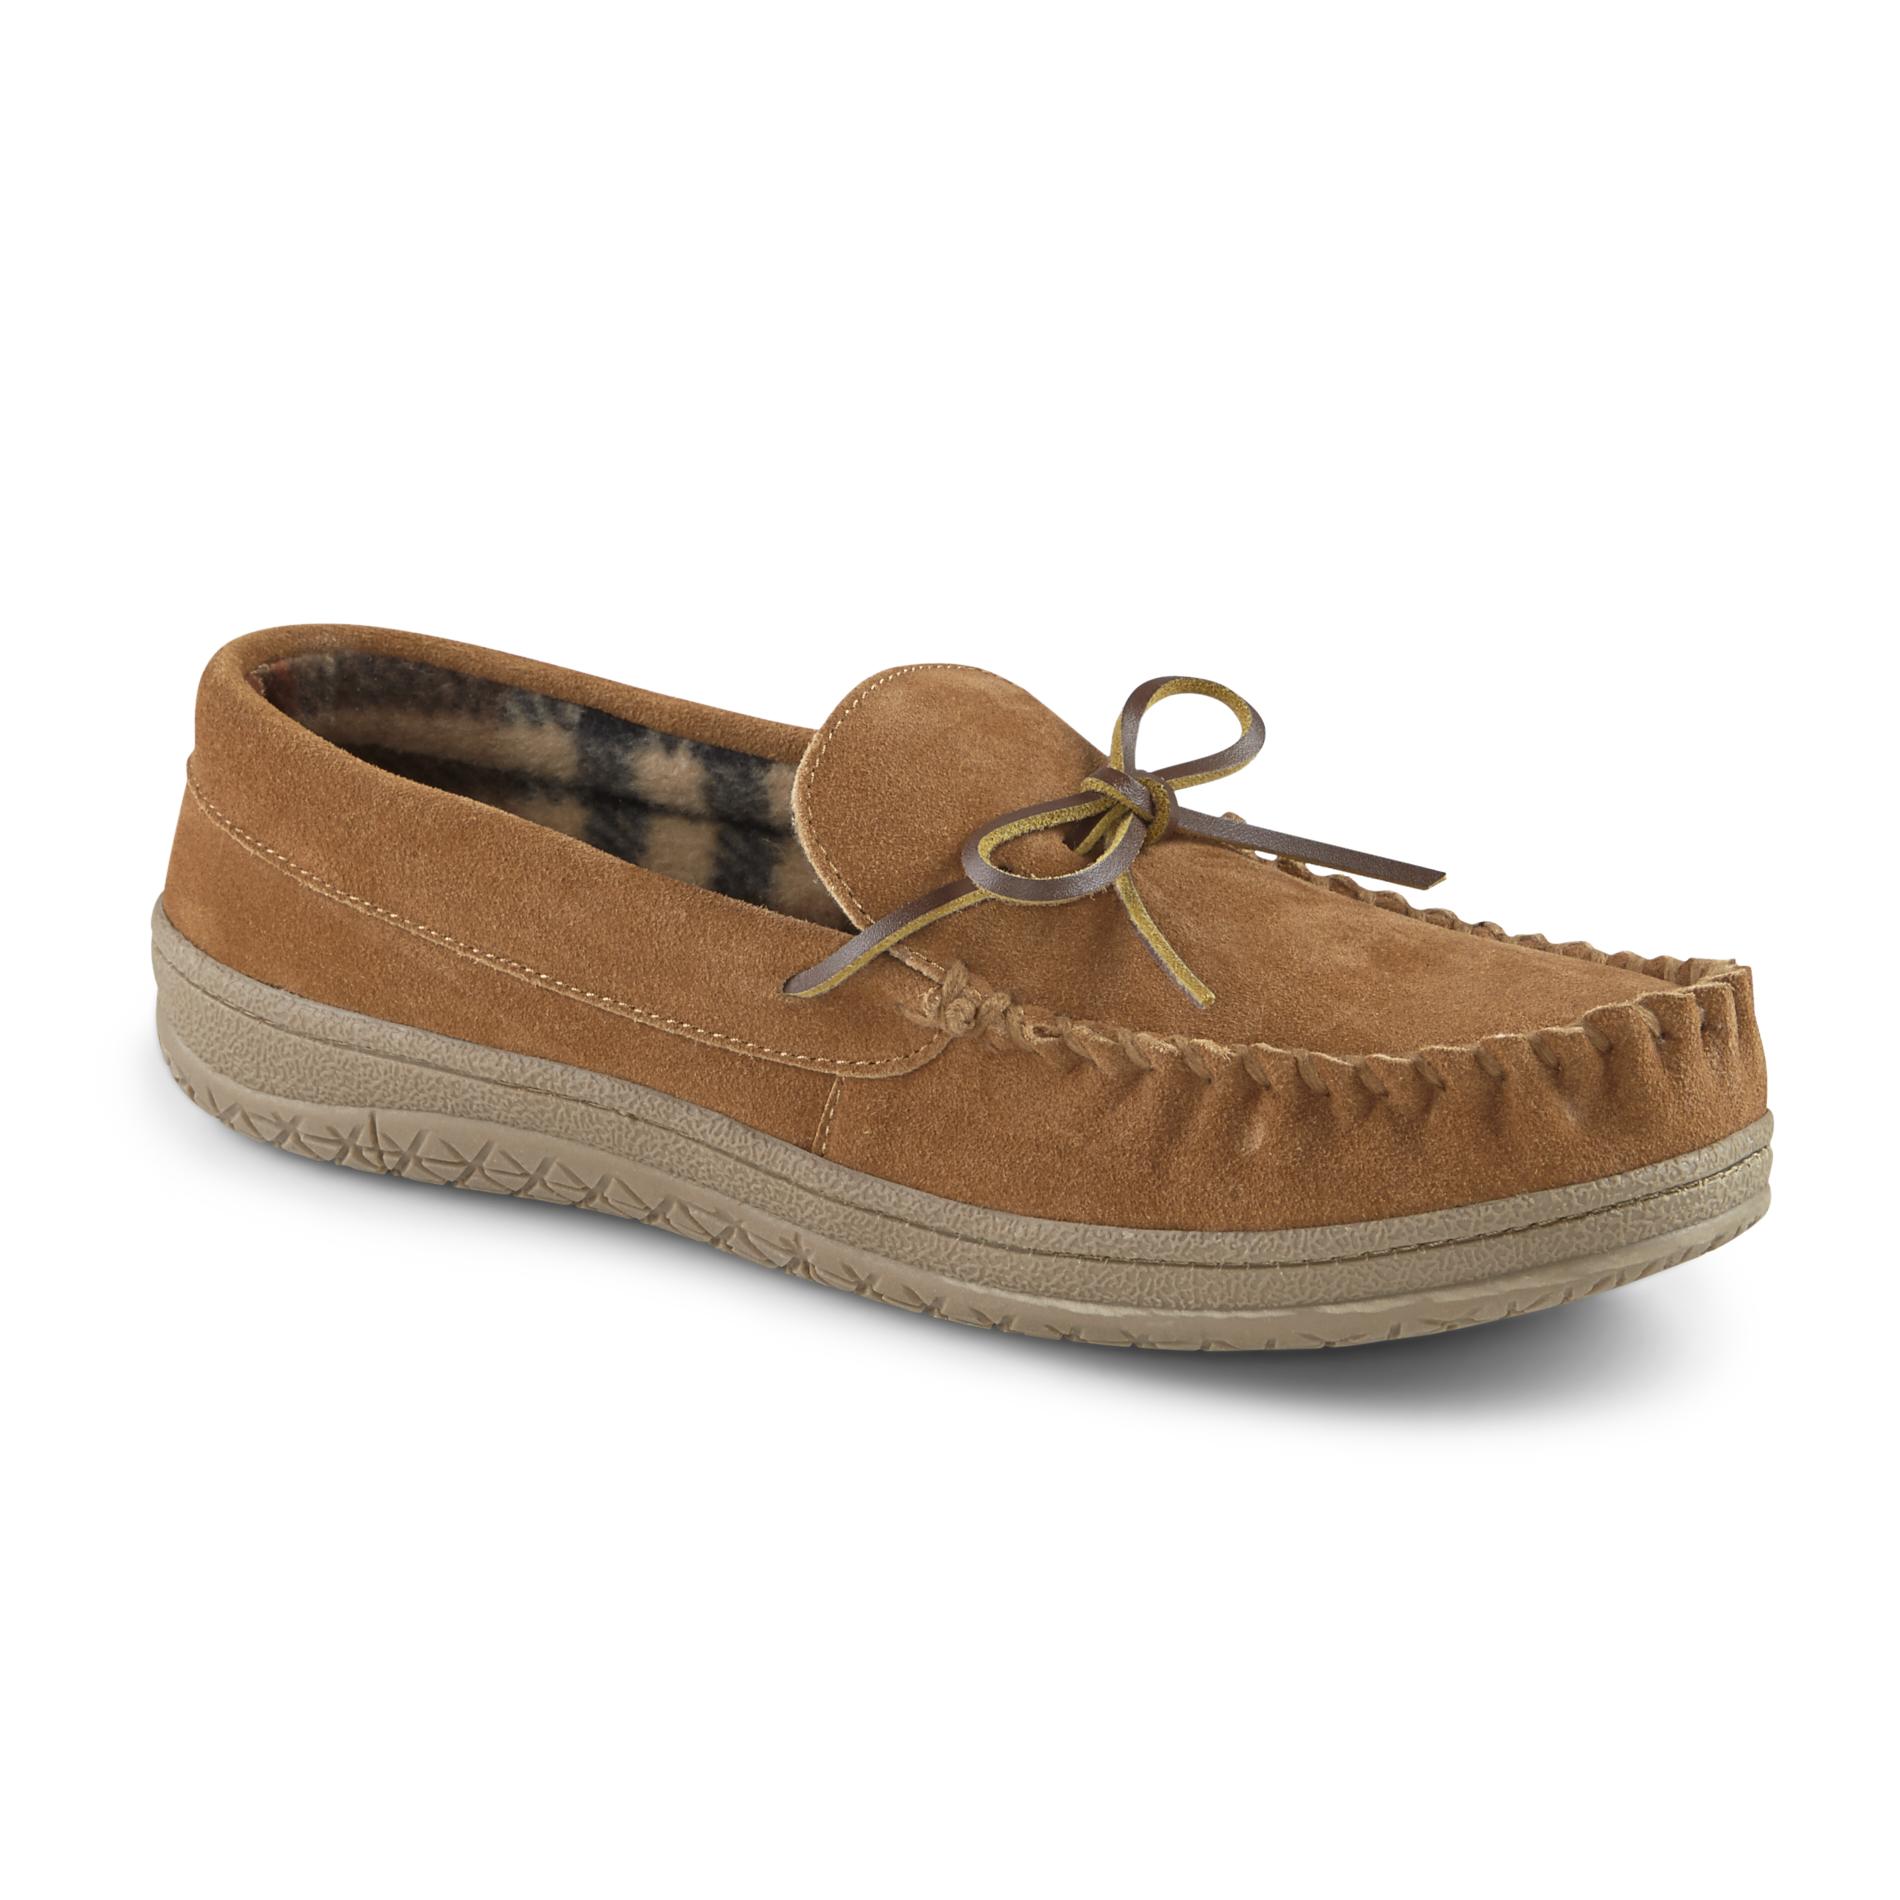 mens moccasin style slippers photo - 1